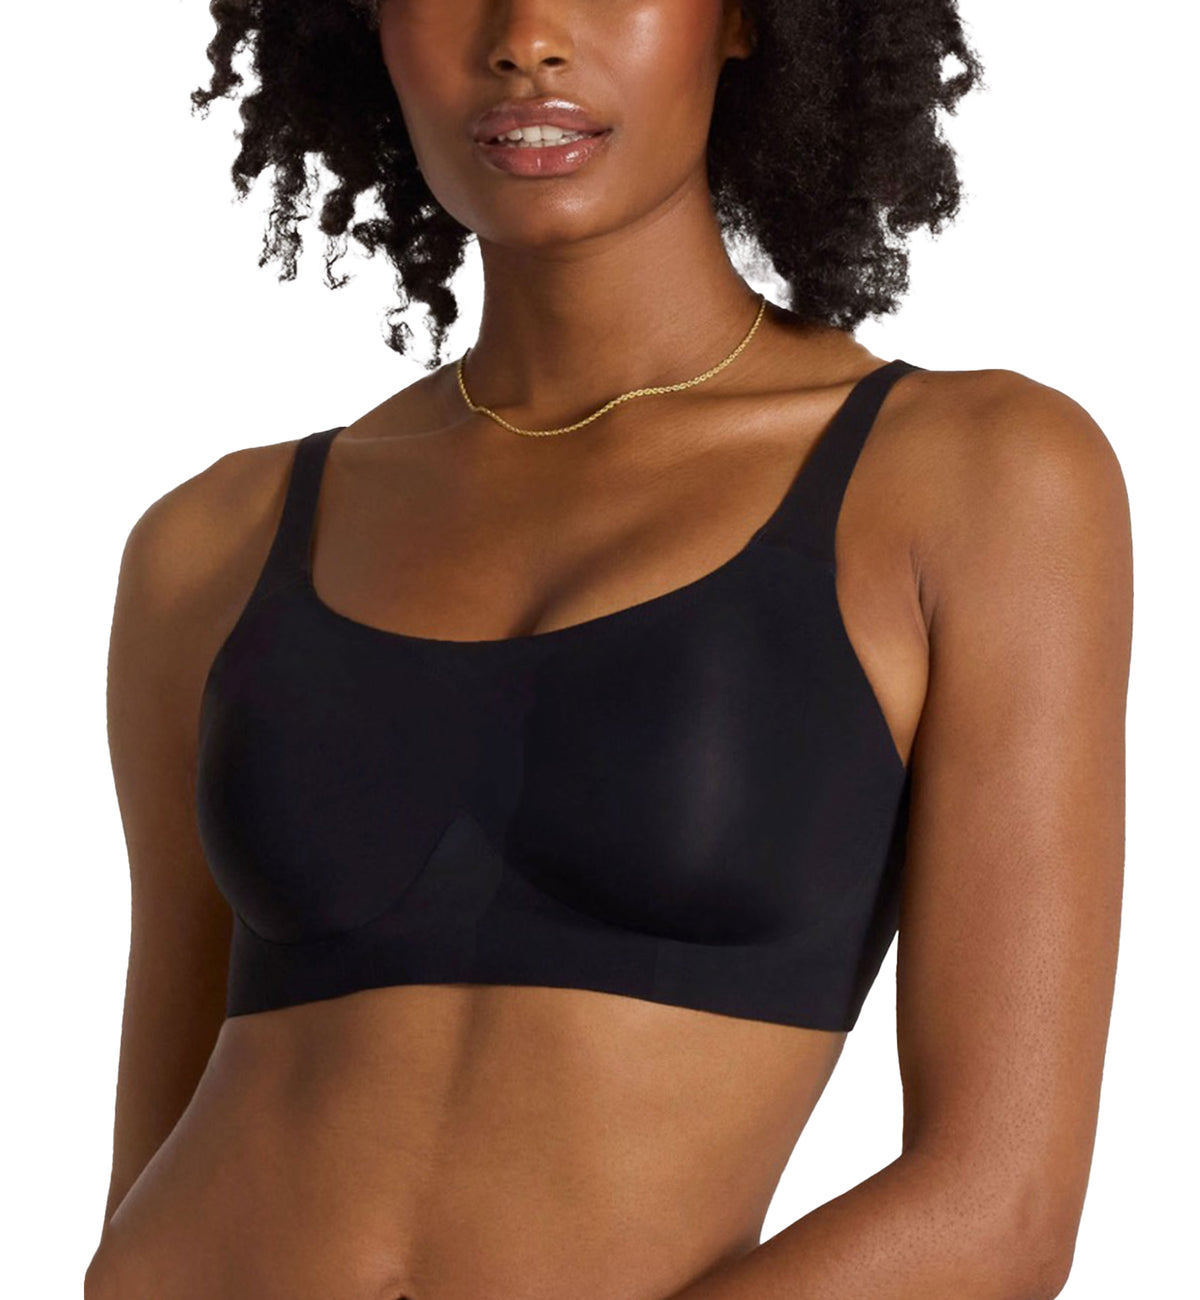 Evelyn &amp; Bobbie STRUCTURED SCOOP Bralette (1801),Small,Black - Black,Small